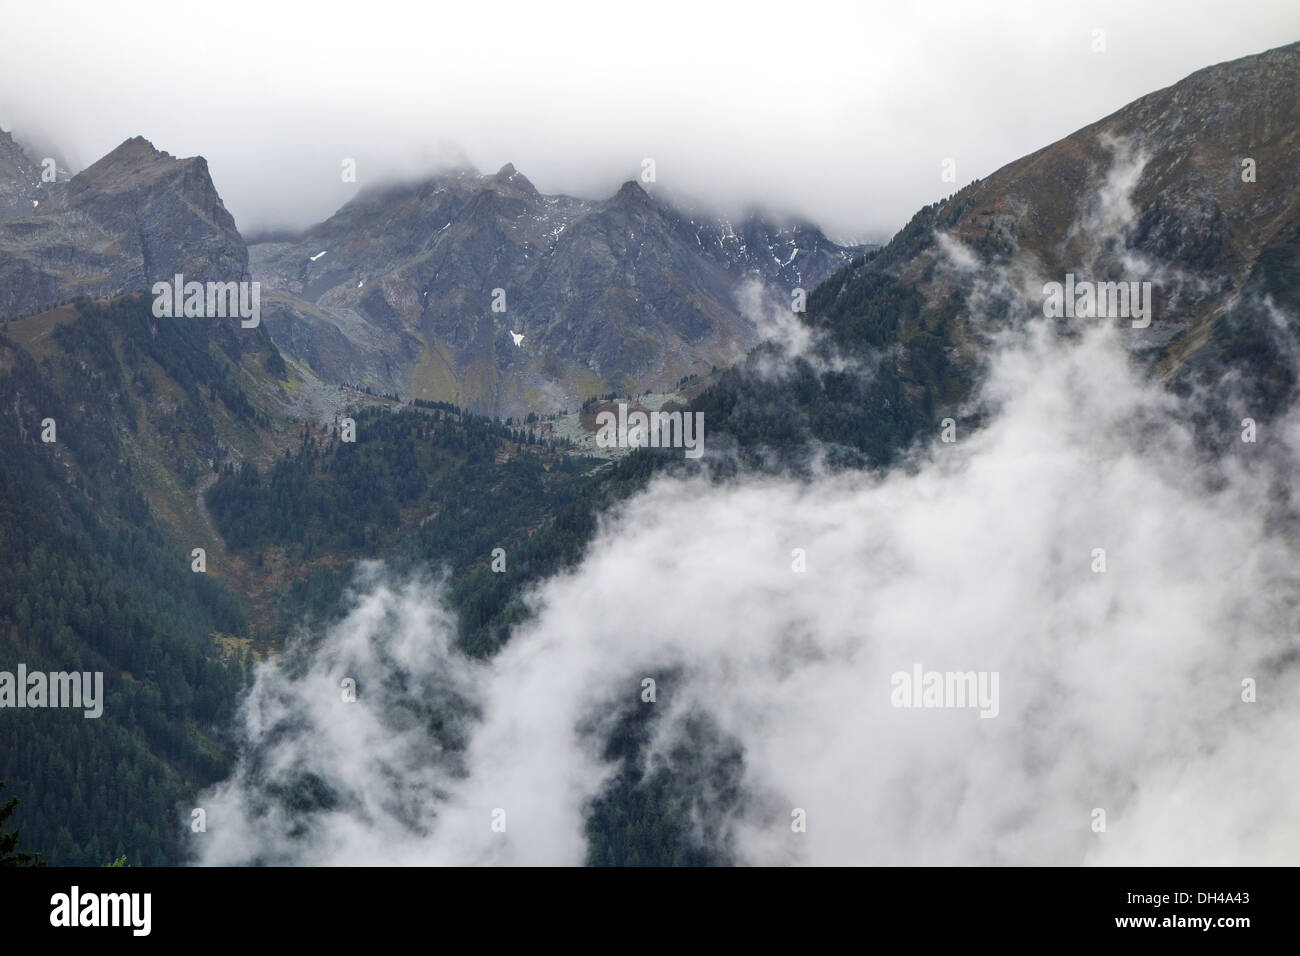 Clouds in the mountains, bad weather Stock Photo